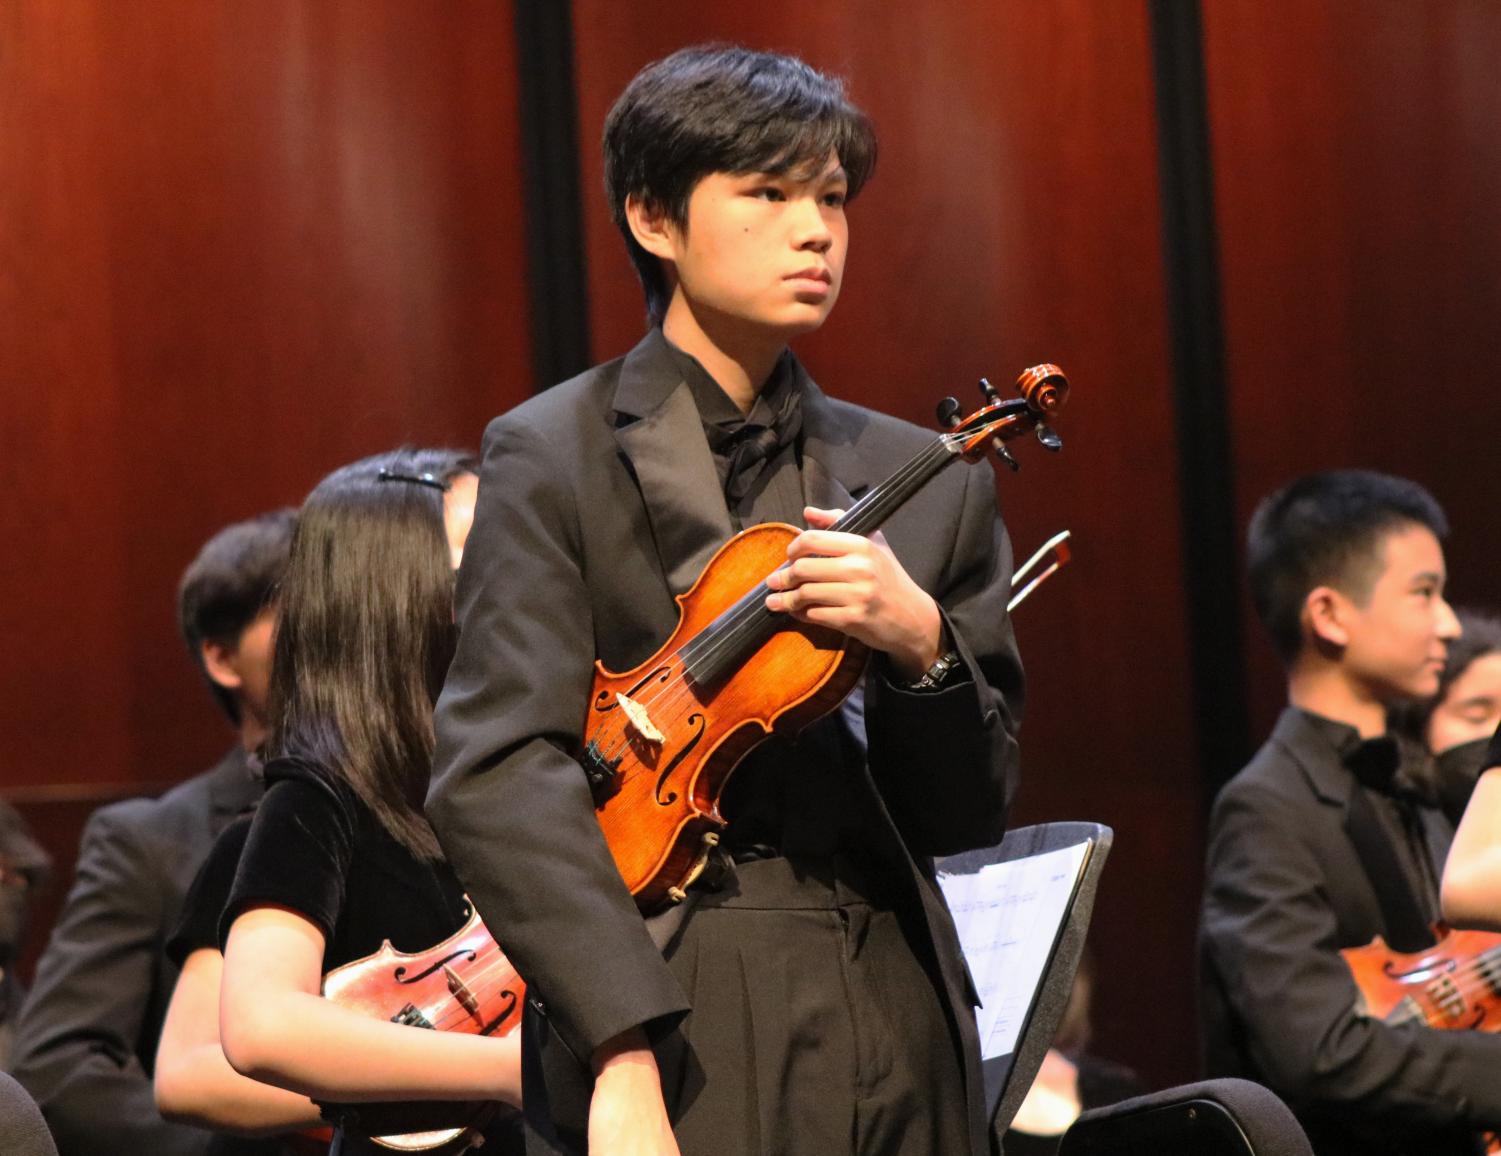 Orchestra+Students+Demonstrate+Technical+Skill+and+Attentive+Artistry+at+Region+Clinic+and+Concert%C2%A0